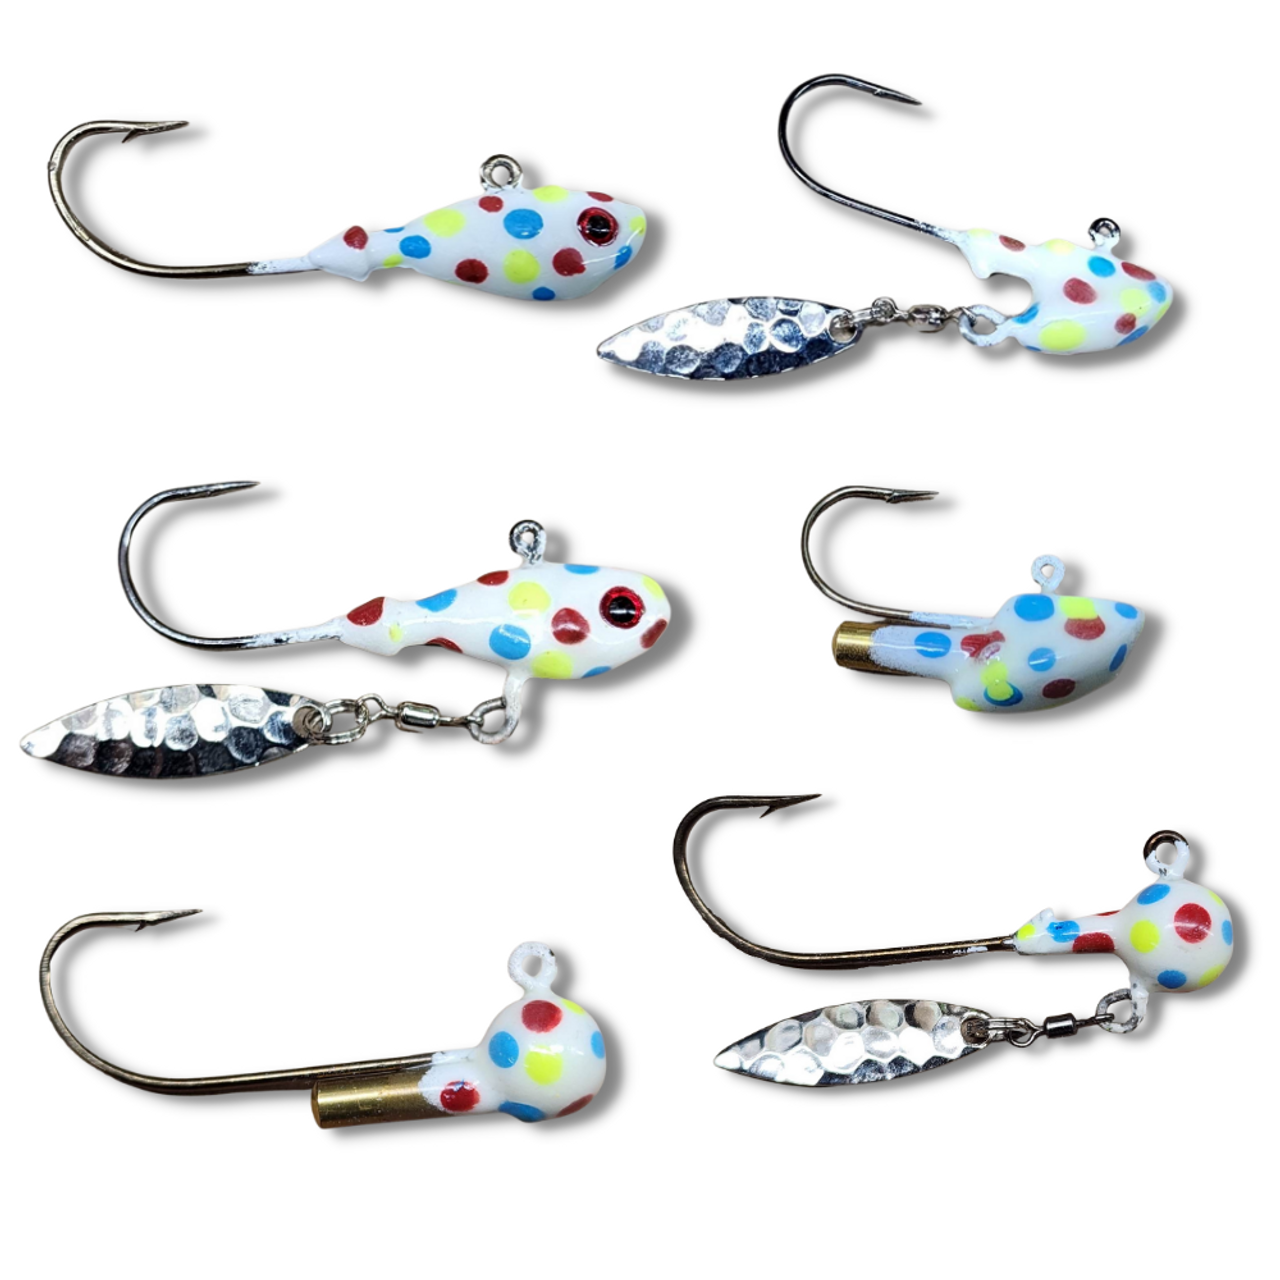 The Wonderbread Jig combines the popular wonderbread pattern with the craftsmanship and durability known to Big Sky Flies and Jigs. All wonderbread patterns feature upgraded hooks and Kryptonite Glow powder paint that light up the bottom of everybody water. Just use direct sunlight or the U.V. flashlights to activate the full superpower of the glow. In addition, these jigs have flashers meant to provide the right flash to catch the eye and attention of predator fish species, triggering aggressive bites. Great for vertical jigging or trolling. The combination of the wonderbread pattern, vibration and flash of the willow leaf blade completed with the Kryptonite Glow powder finish keep sight and sound in mind for targeting all fish species. 
In addition, these jigs have incorporated brass rattles that are hand-poured into every single jig.
